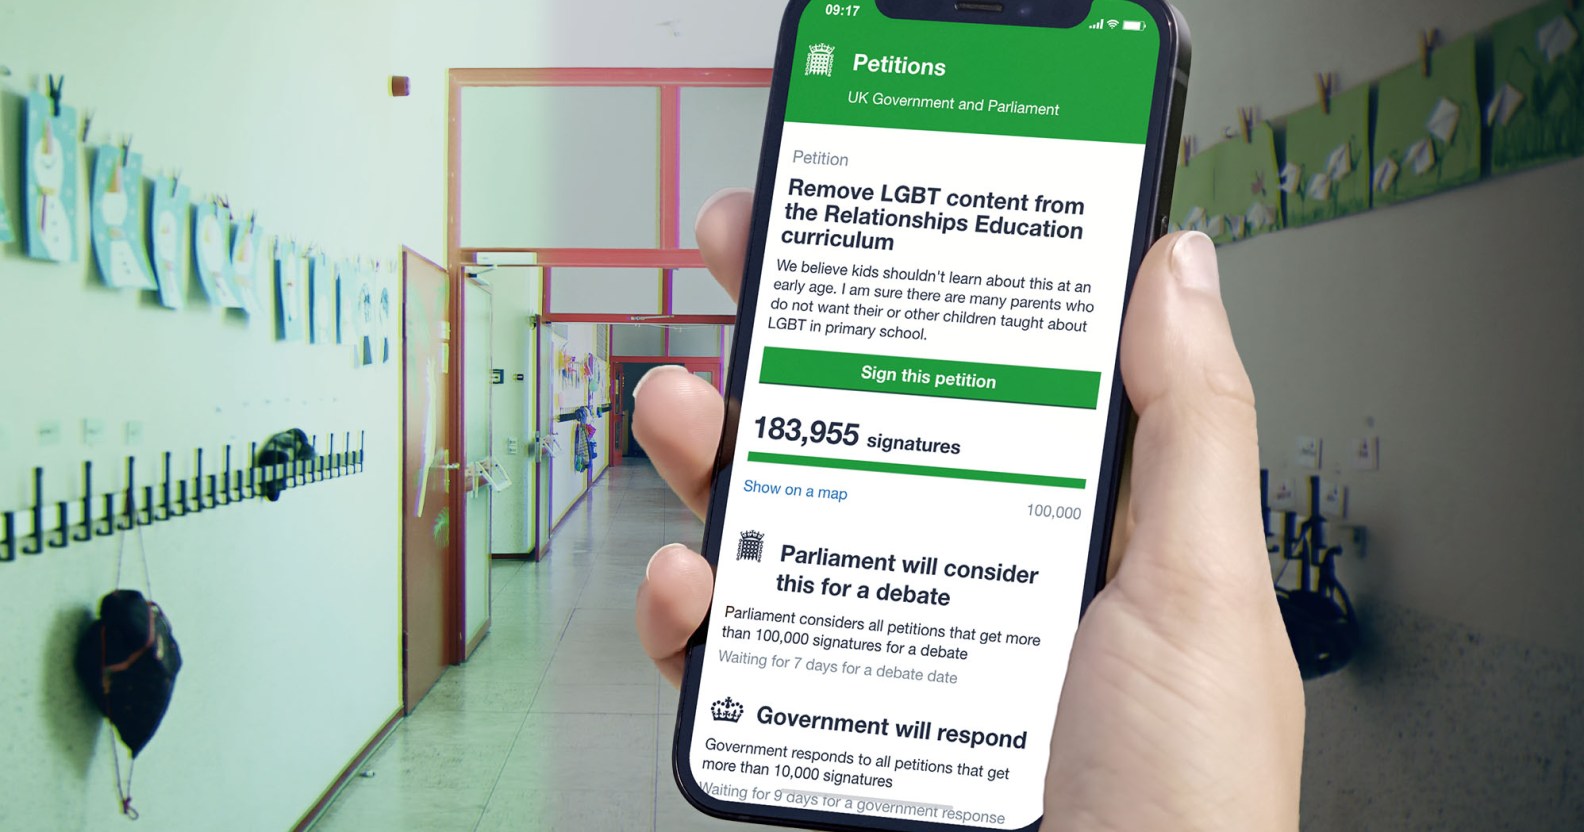 An image of a hand holding a phone showing a petition to pull LGBT content from schools